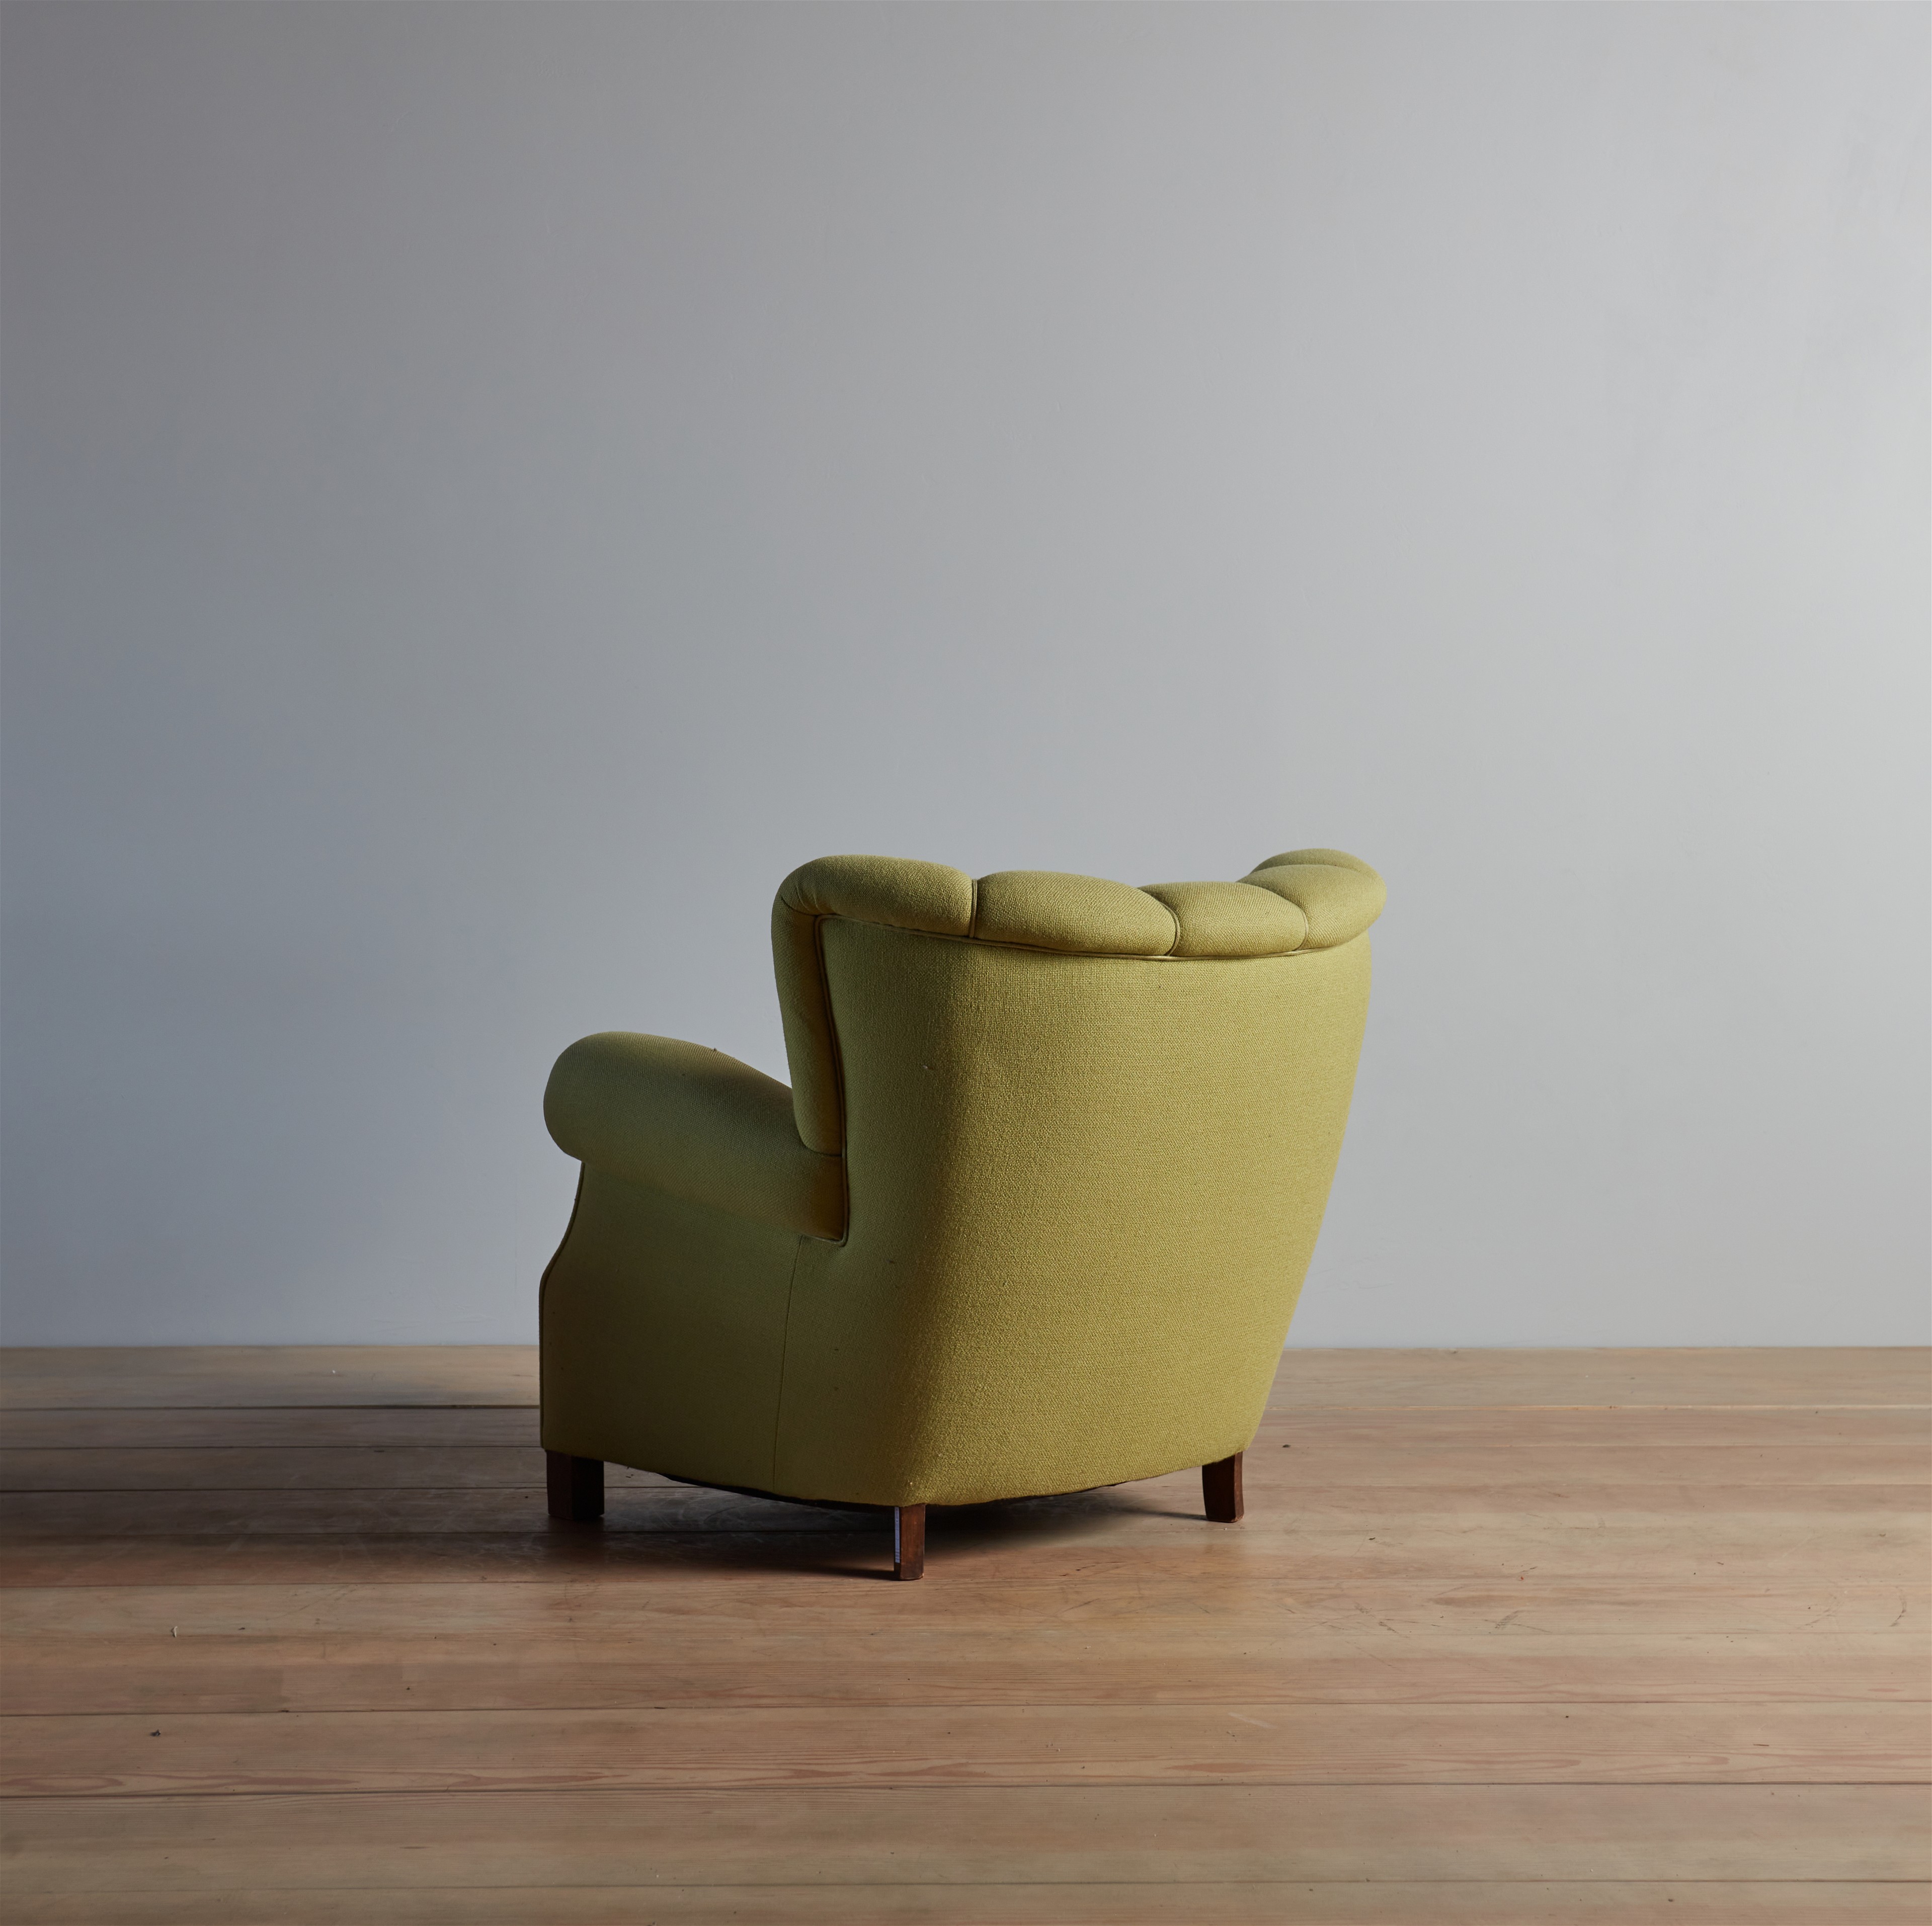 a yellow chair sitting on top of a wooden floor